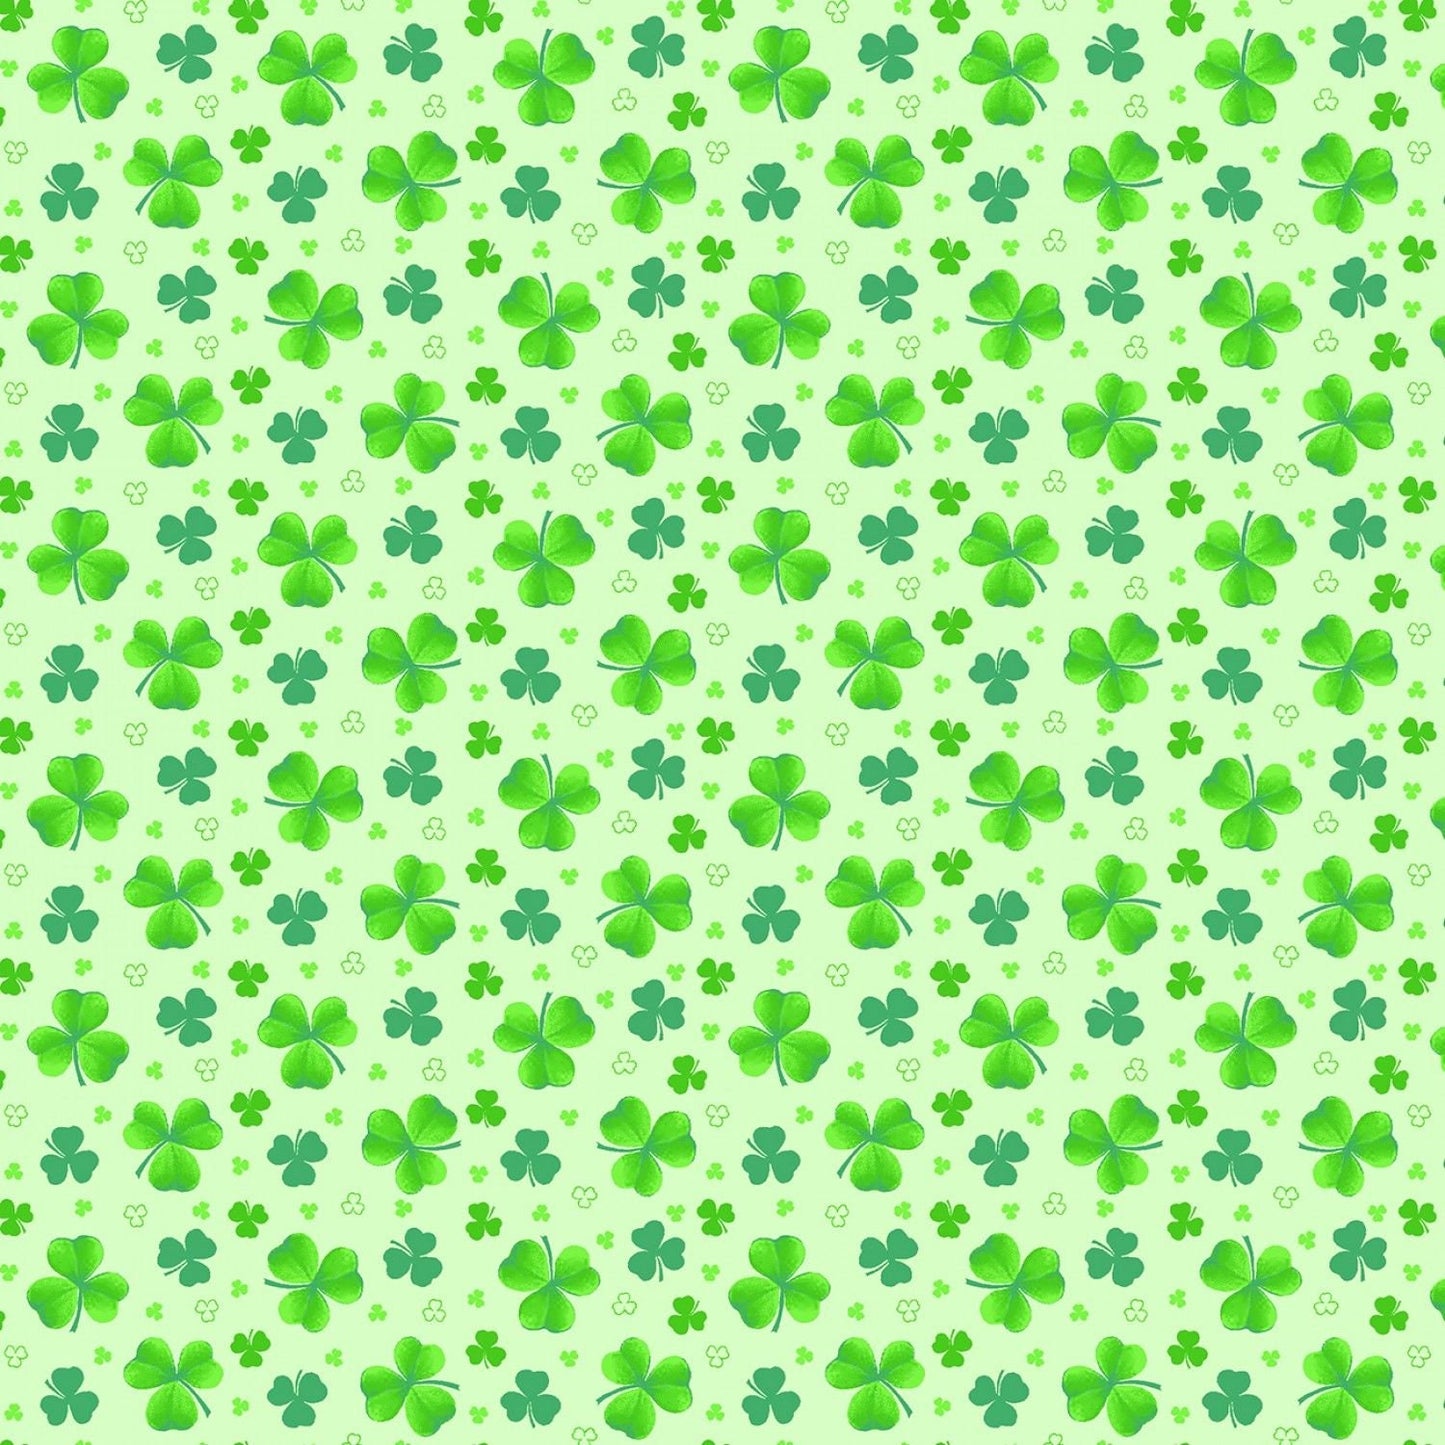 Pot of Gold by City Art Collection Tossed Clover Green 9368-66  Cotton Woven Fabric